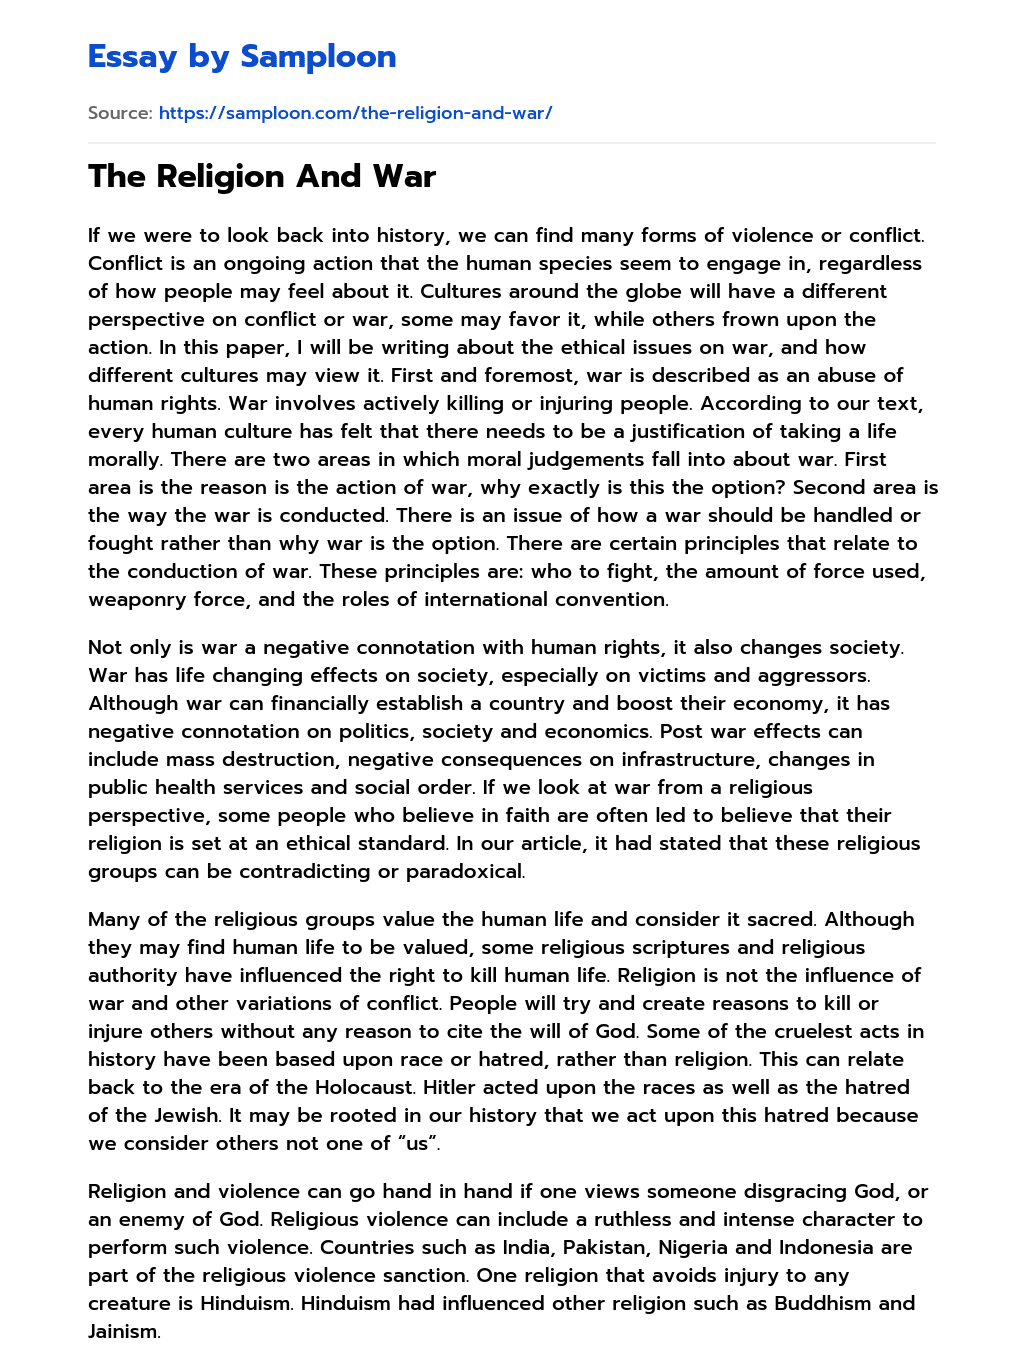 The Religion And War essay